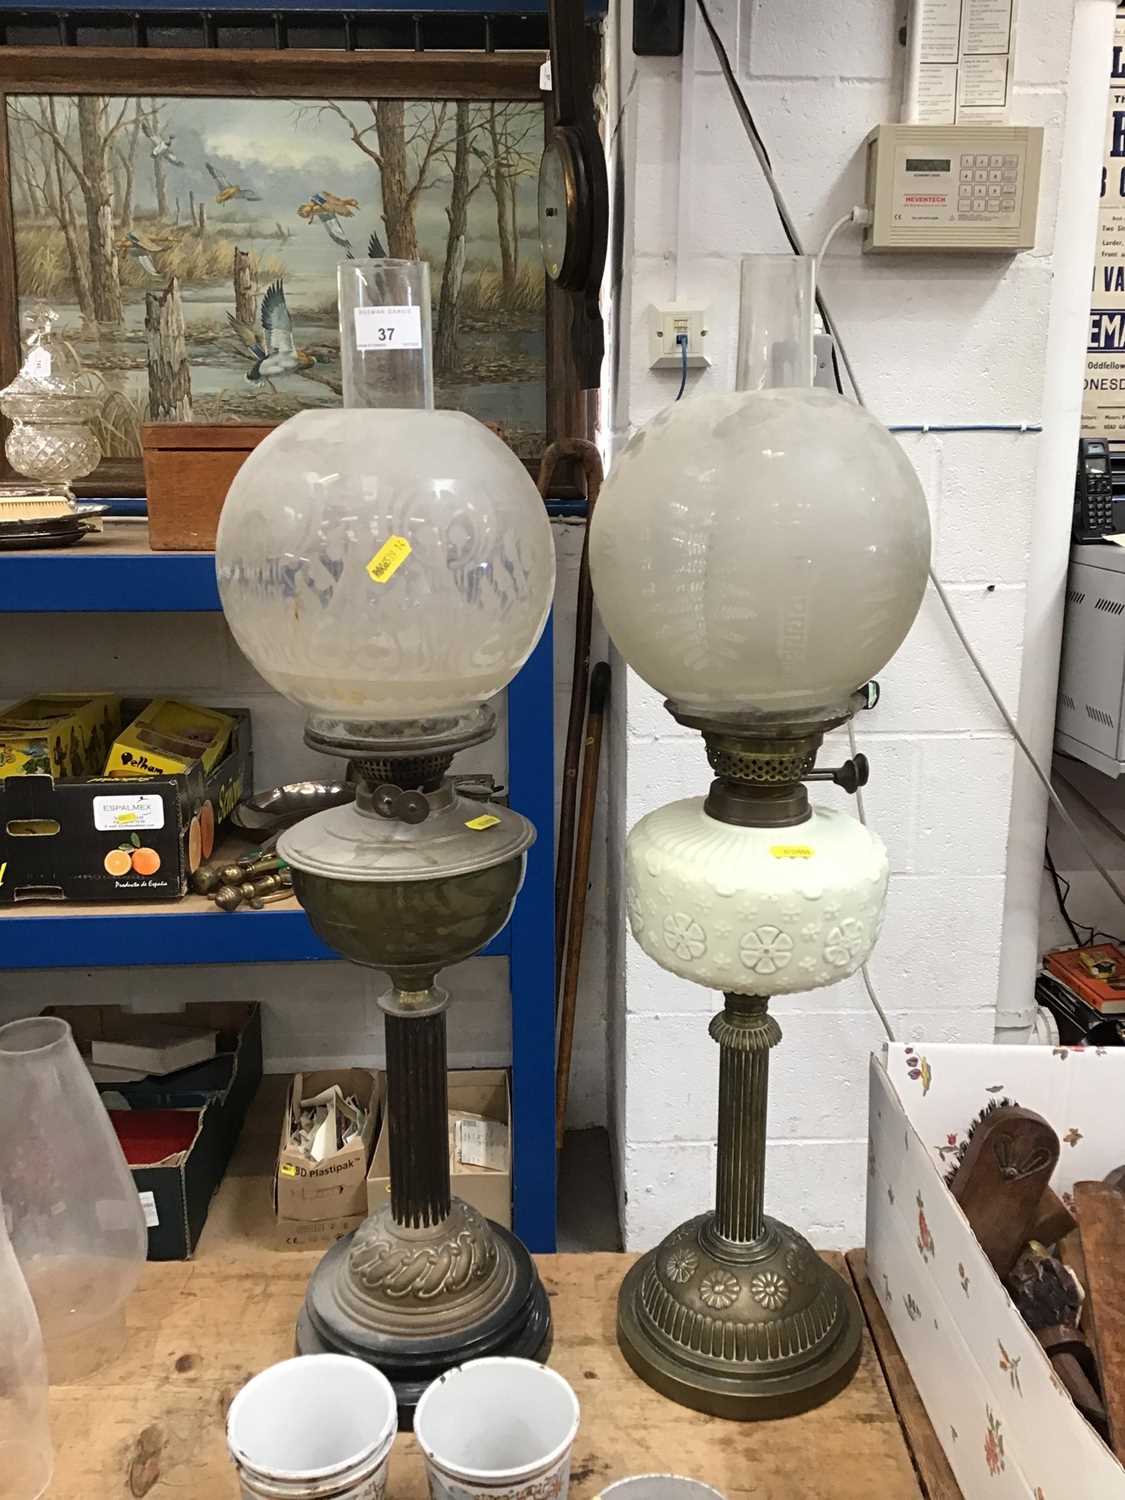 Lot 37 - Two Victorian brass oil lamps, one with a milk glass reservoir (2)